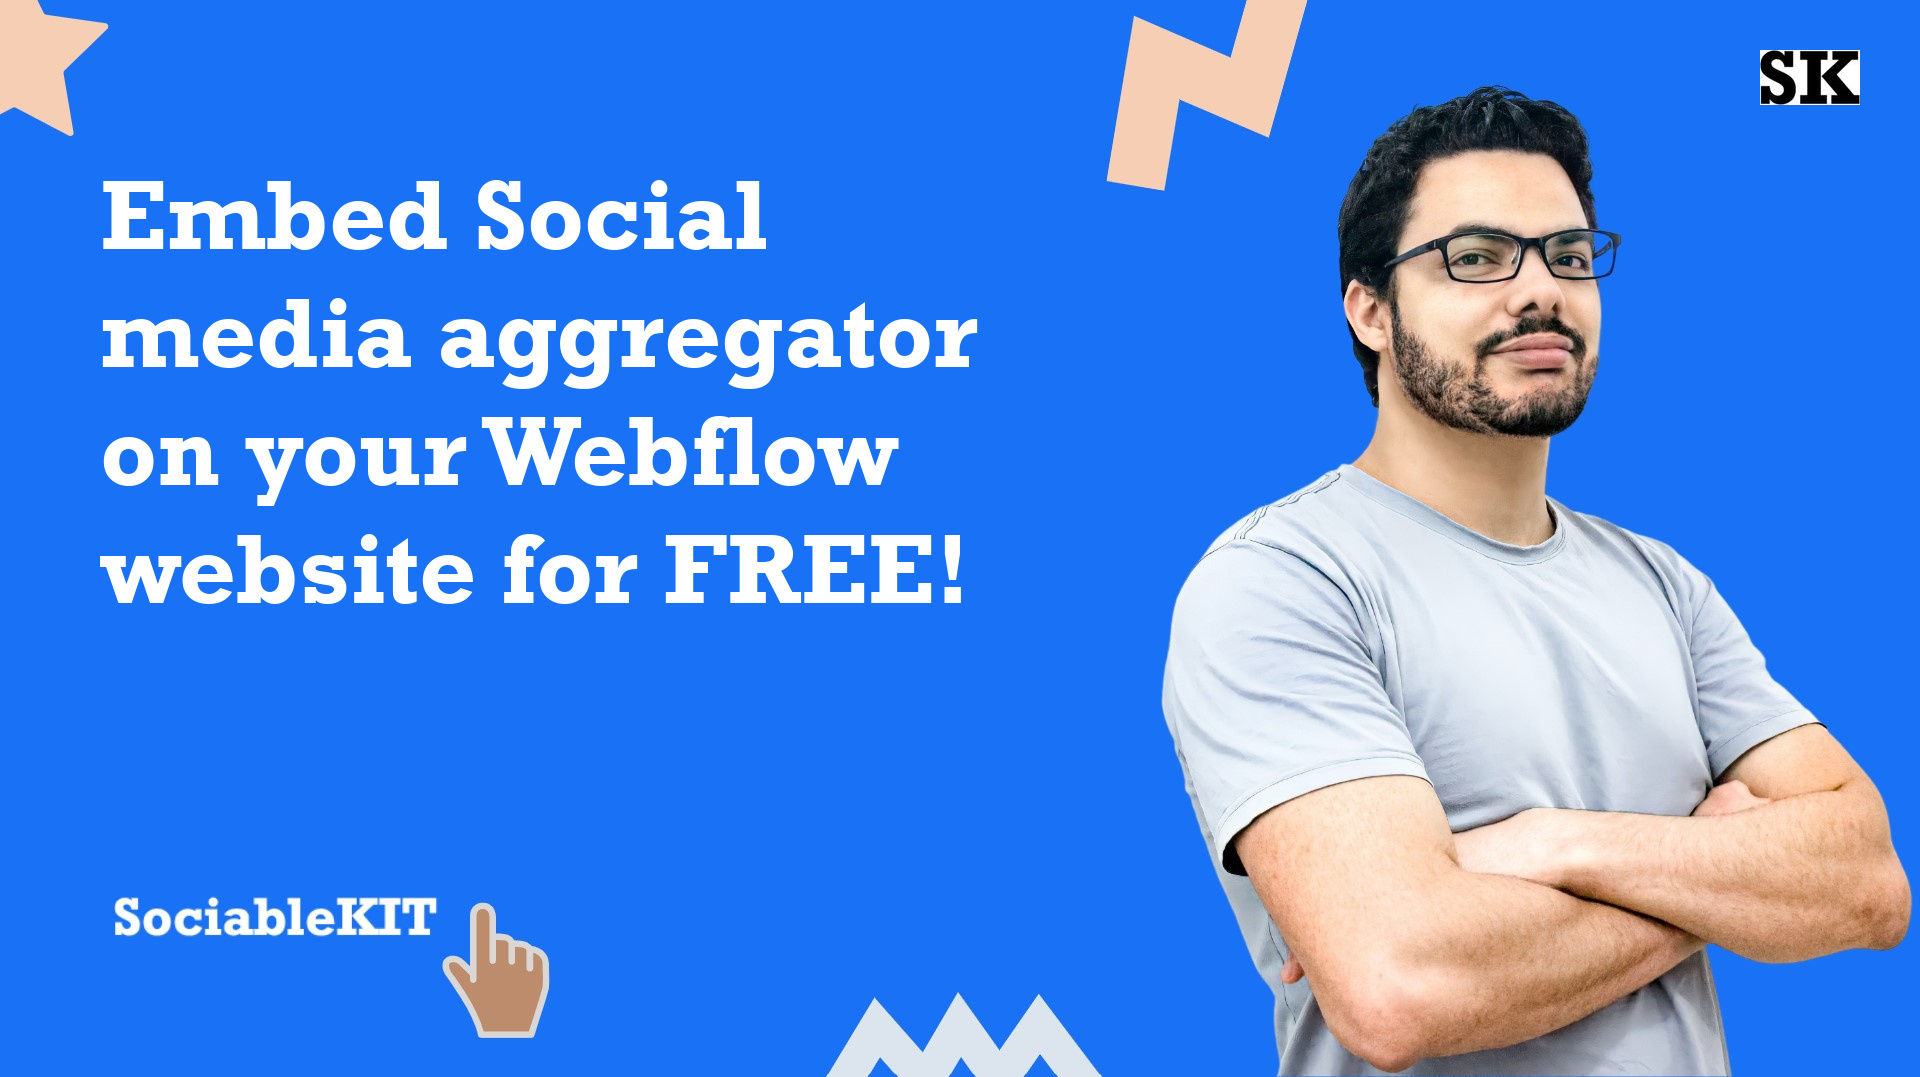 How to embed Social media aggregator on your Webflow website for FREE?